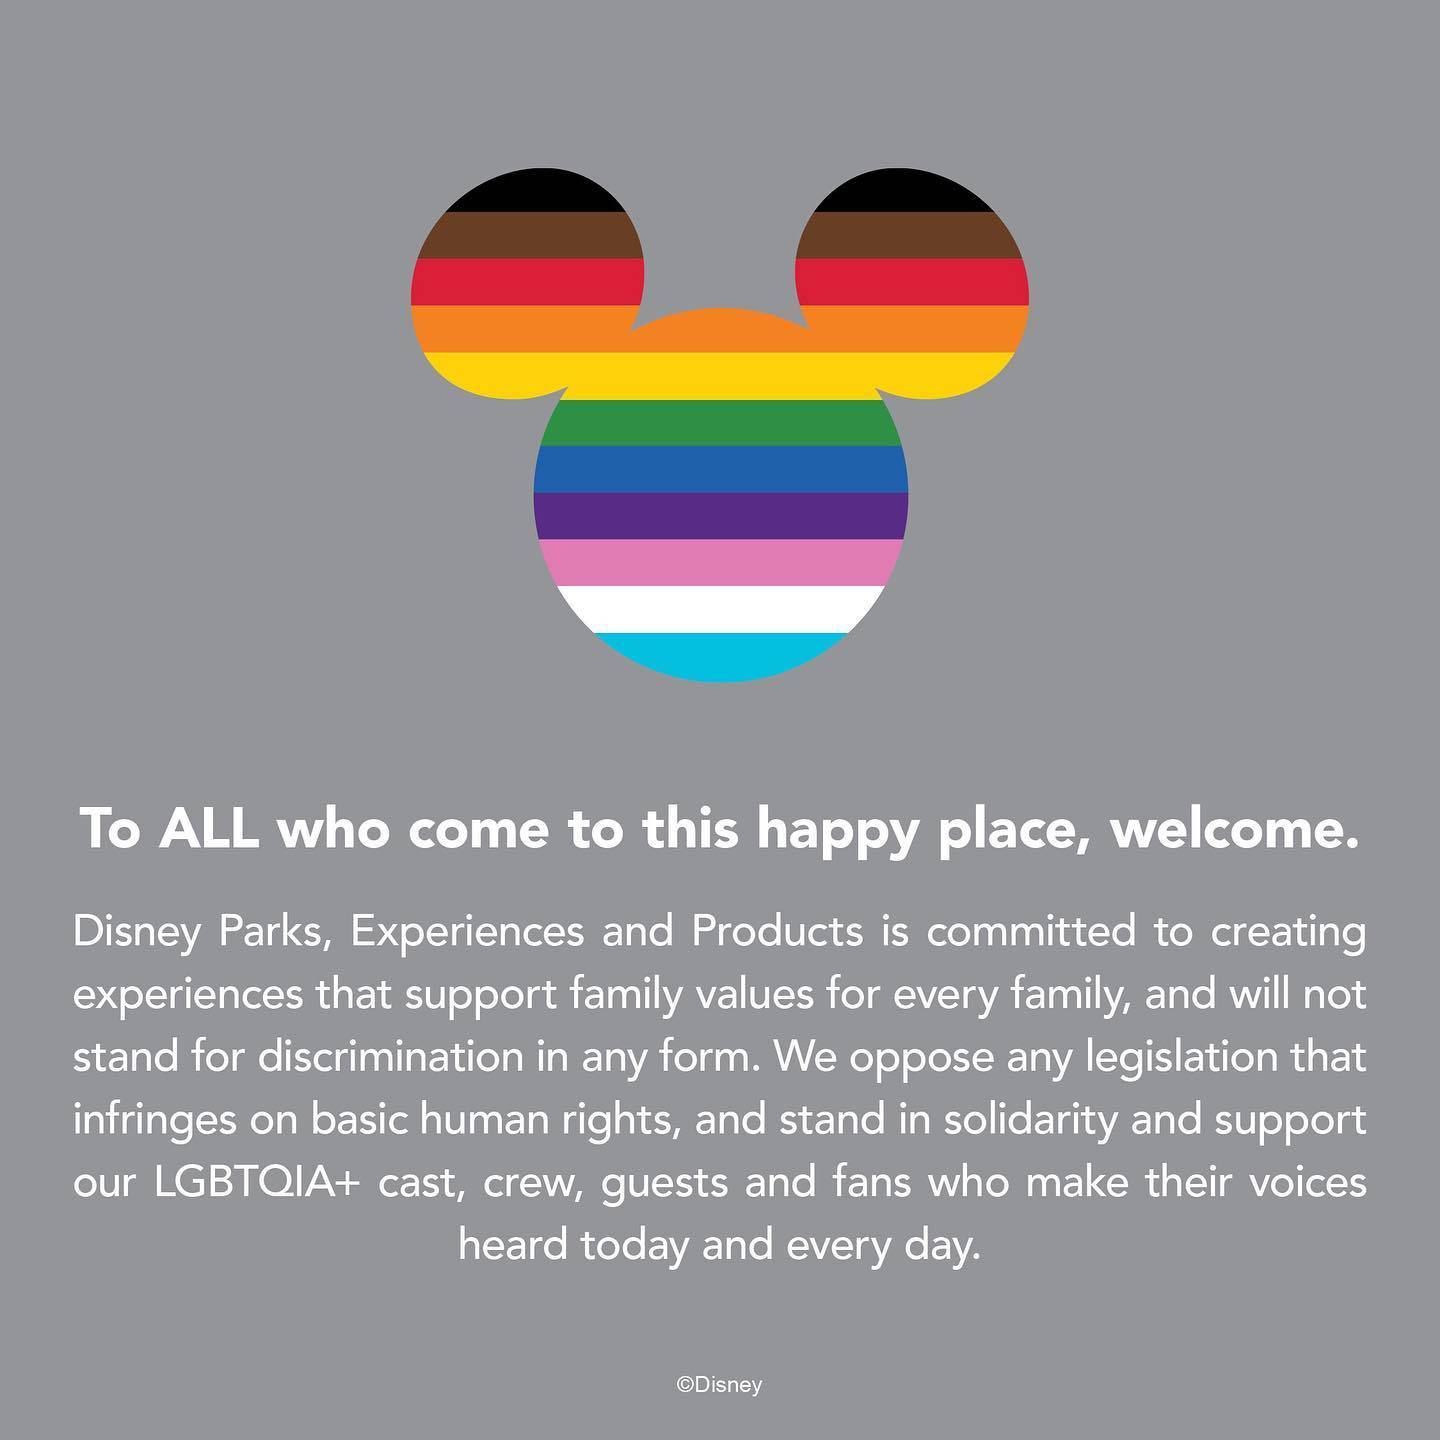 Disney Parks, Experiences and Products statement in support of LGBTQIA+